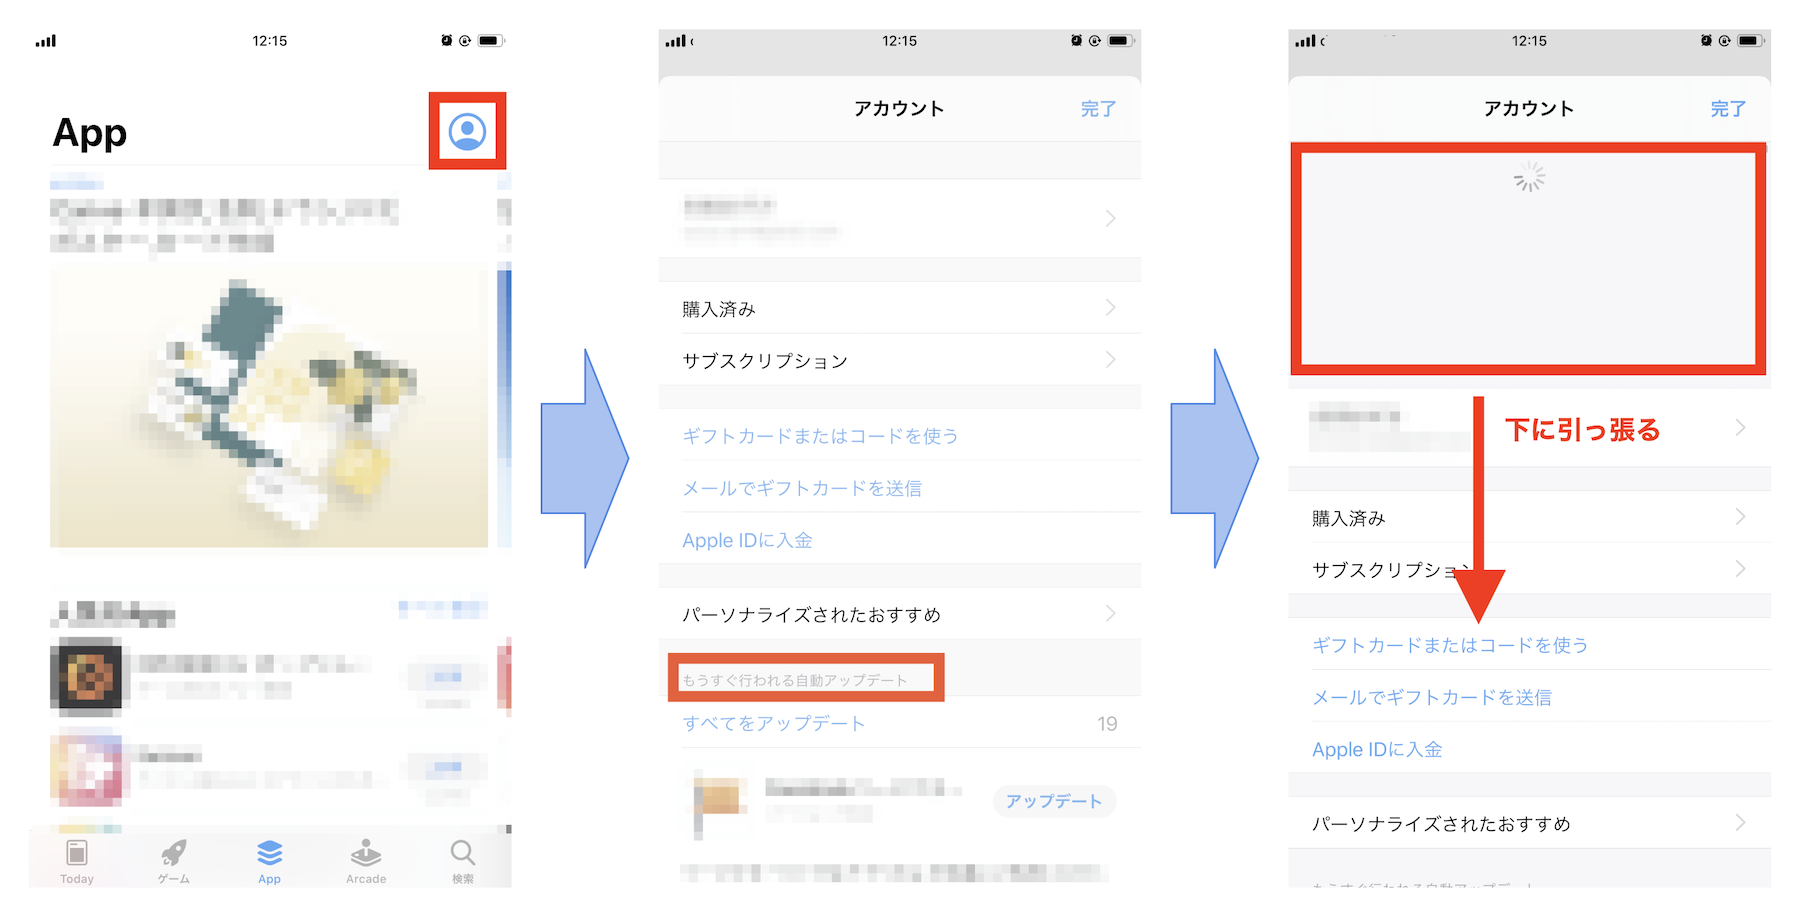 20191126_howto_refresh-appstore-iOS13.png